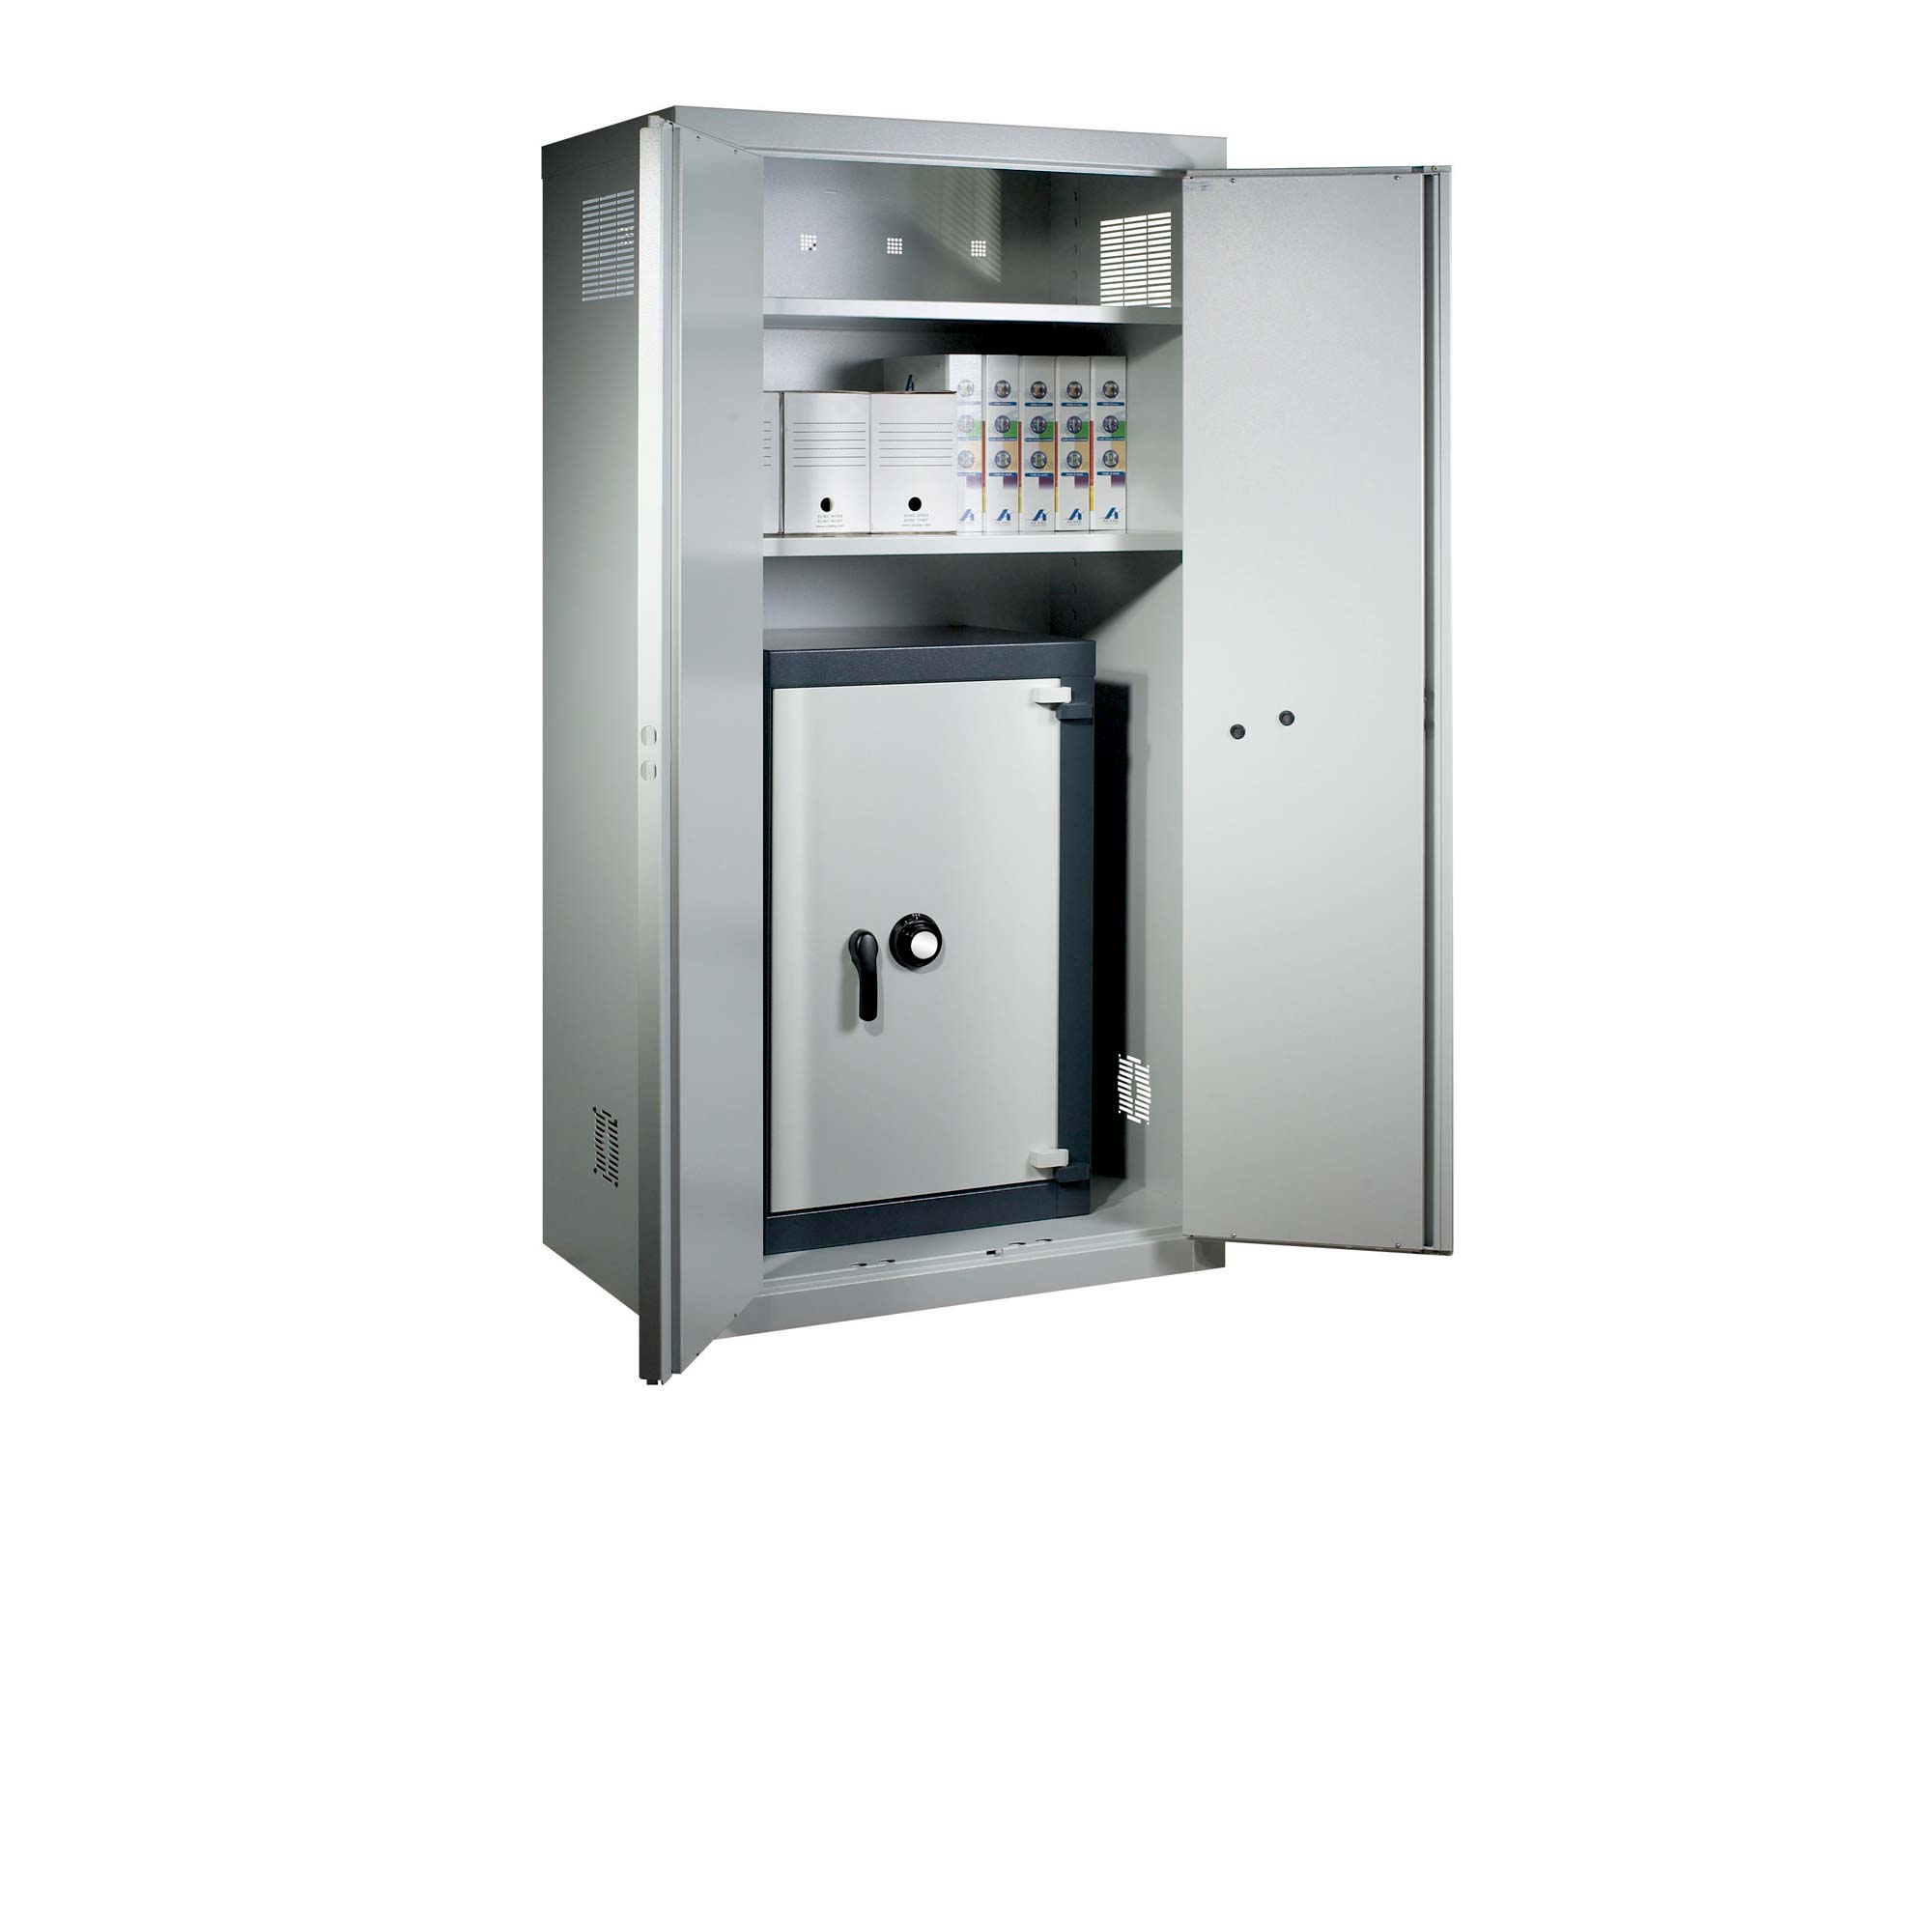 Safes and security cabinets